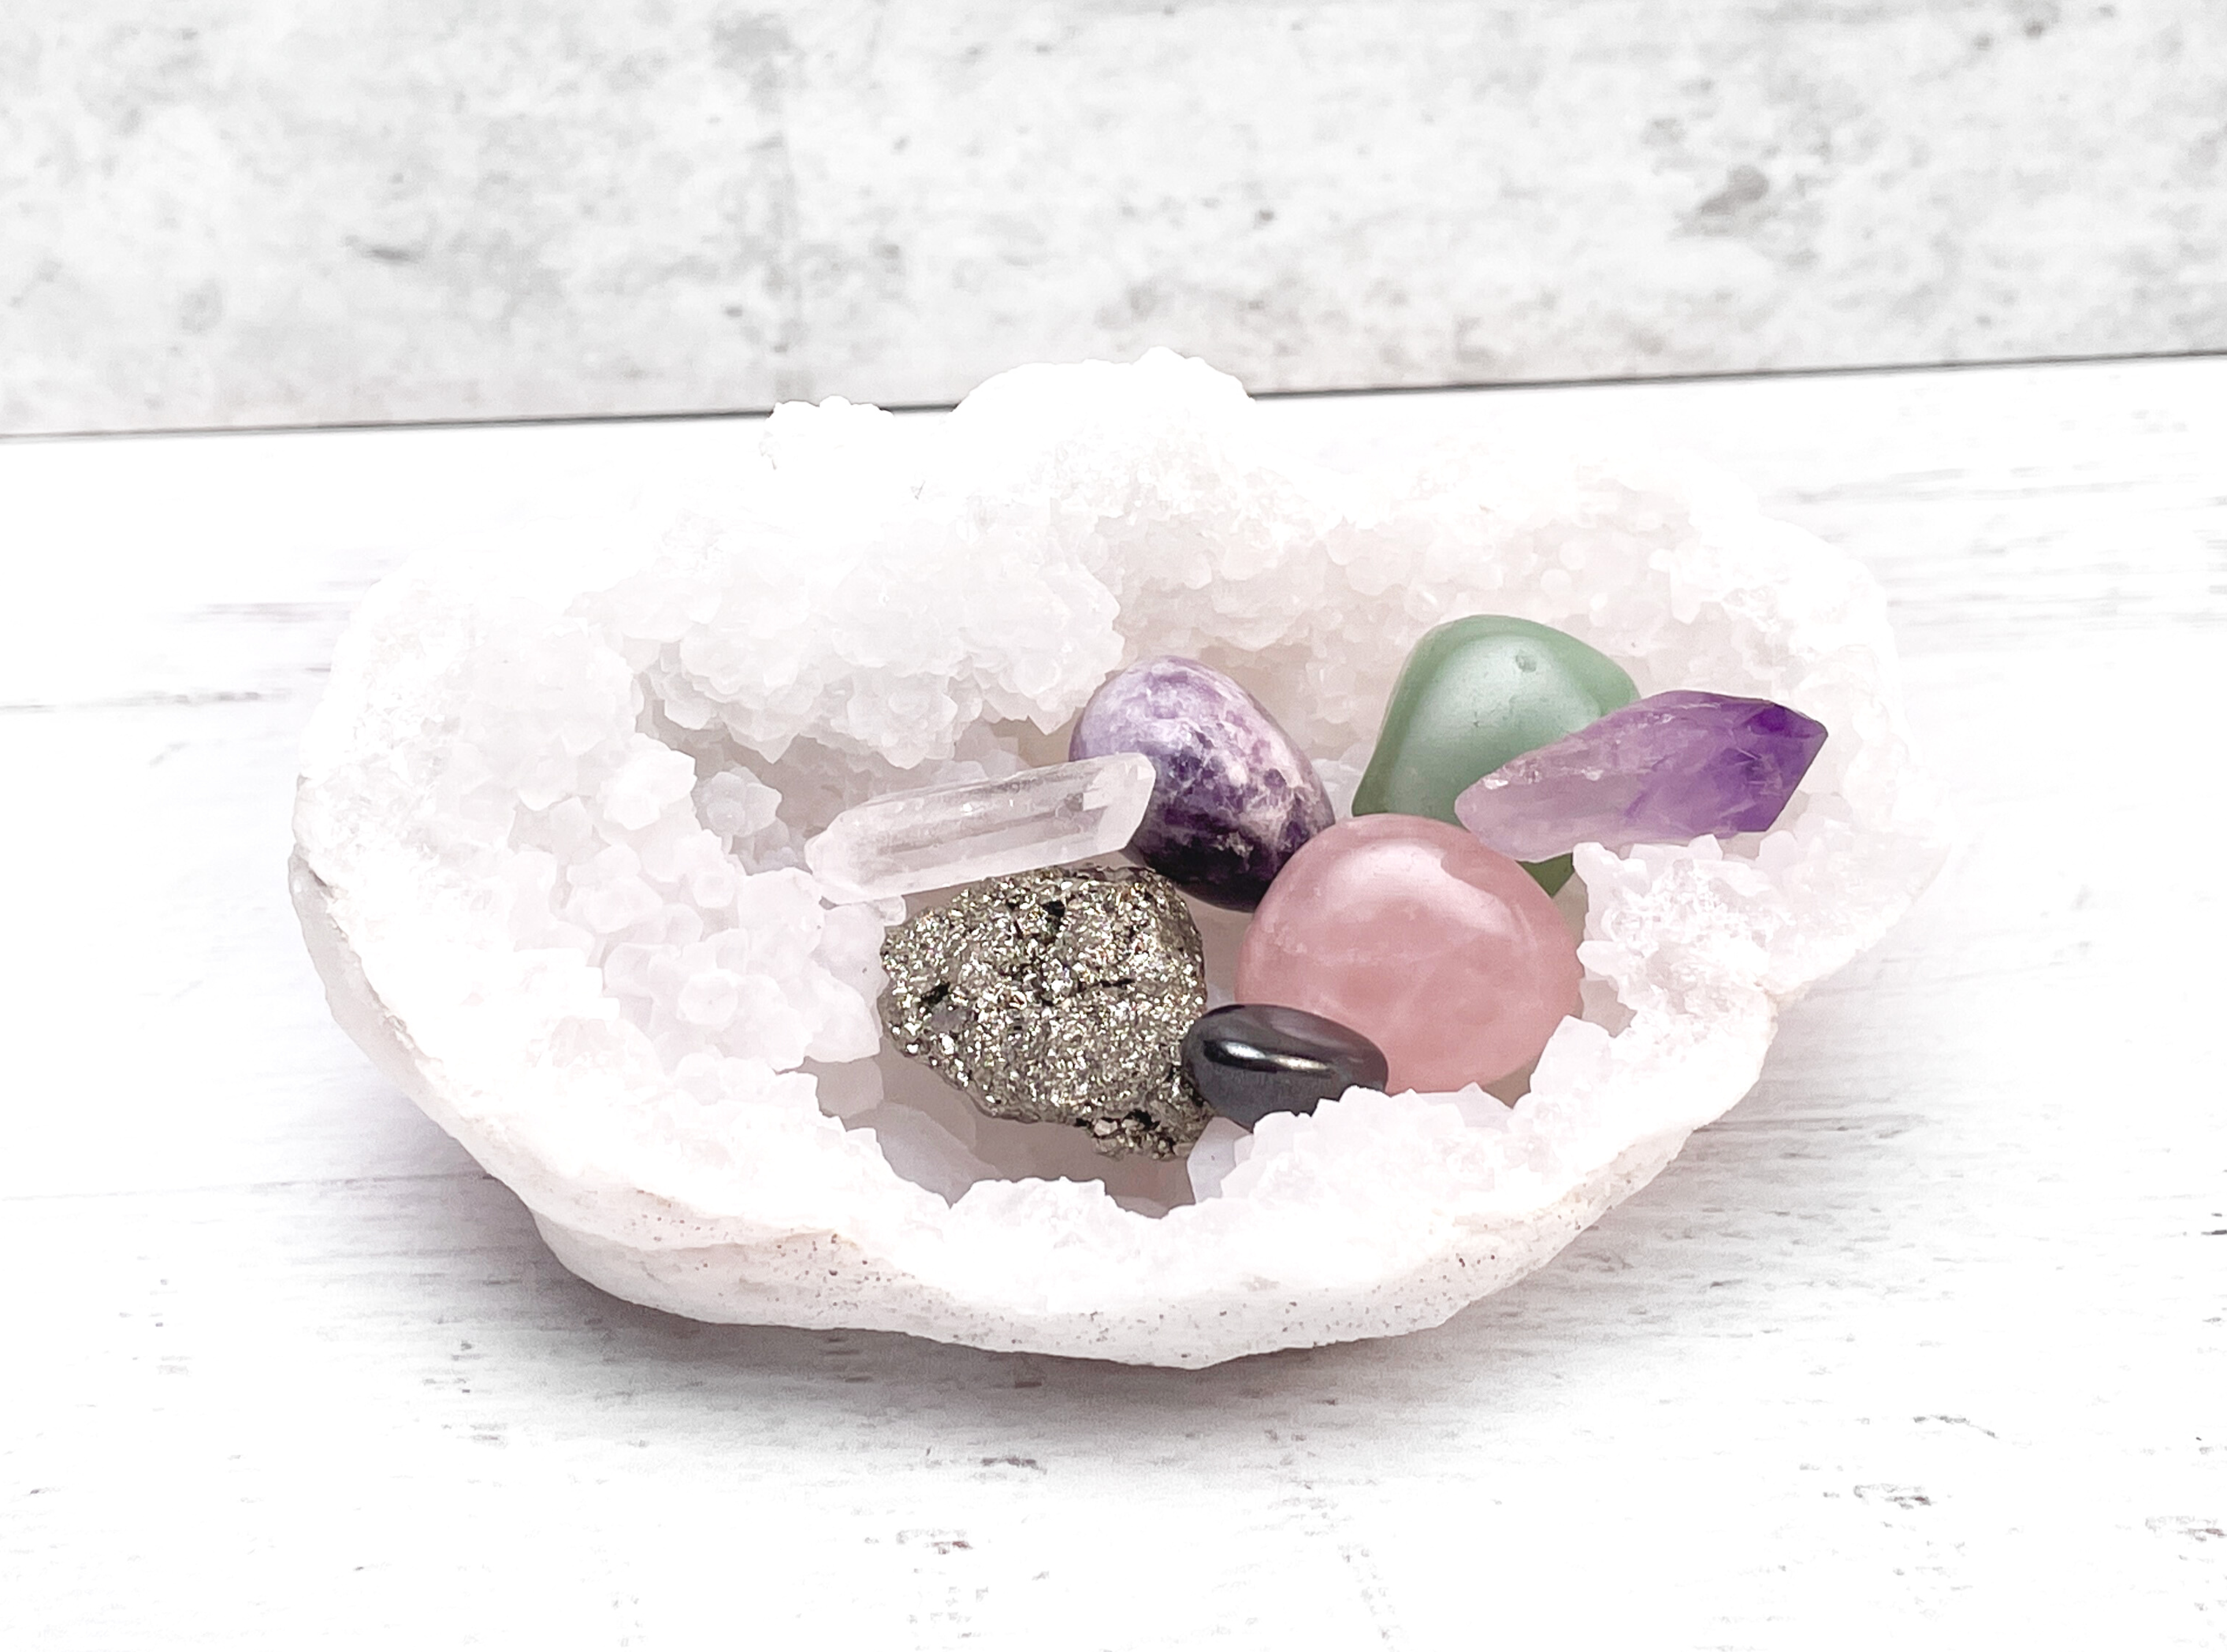 Buy Online Latest and Unique Healing Crystals Pocket Bundle | Shop Best Spiritual Items - The Mystical Ritual